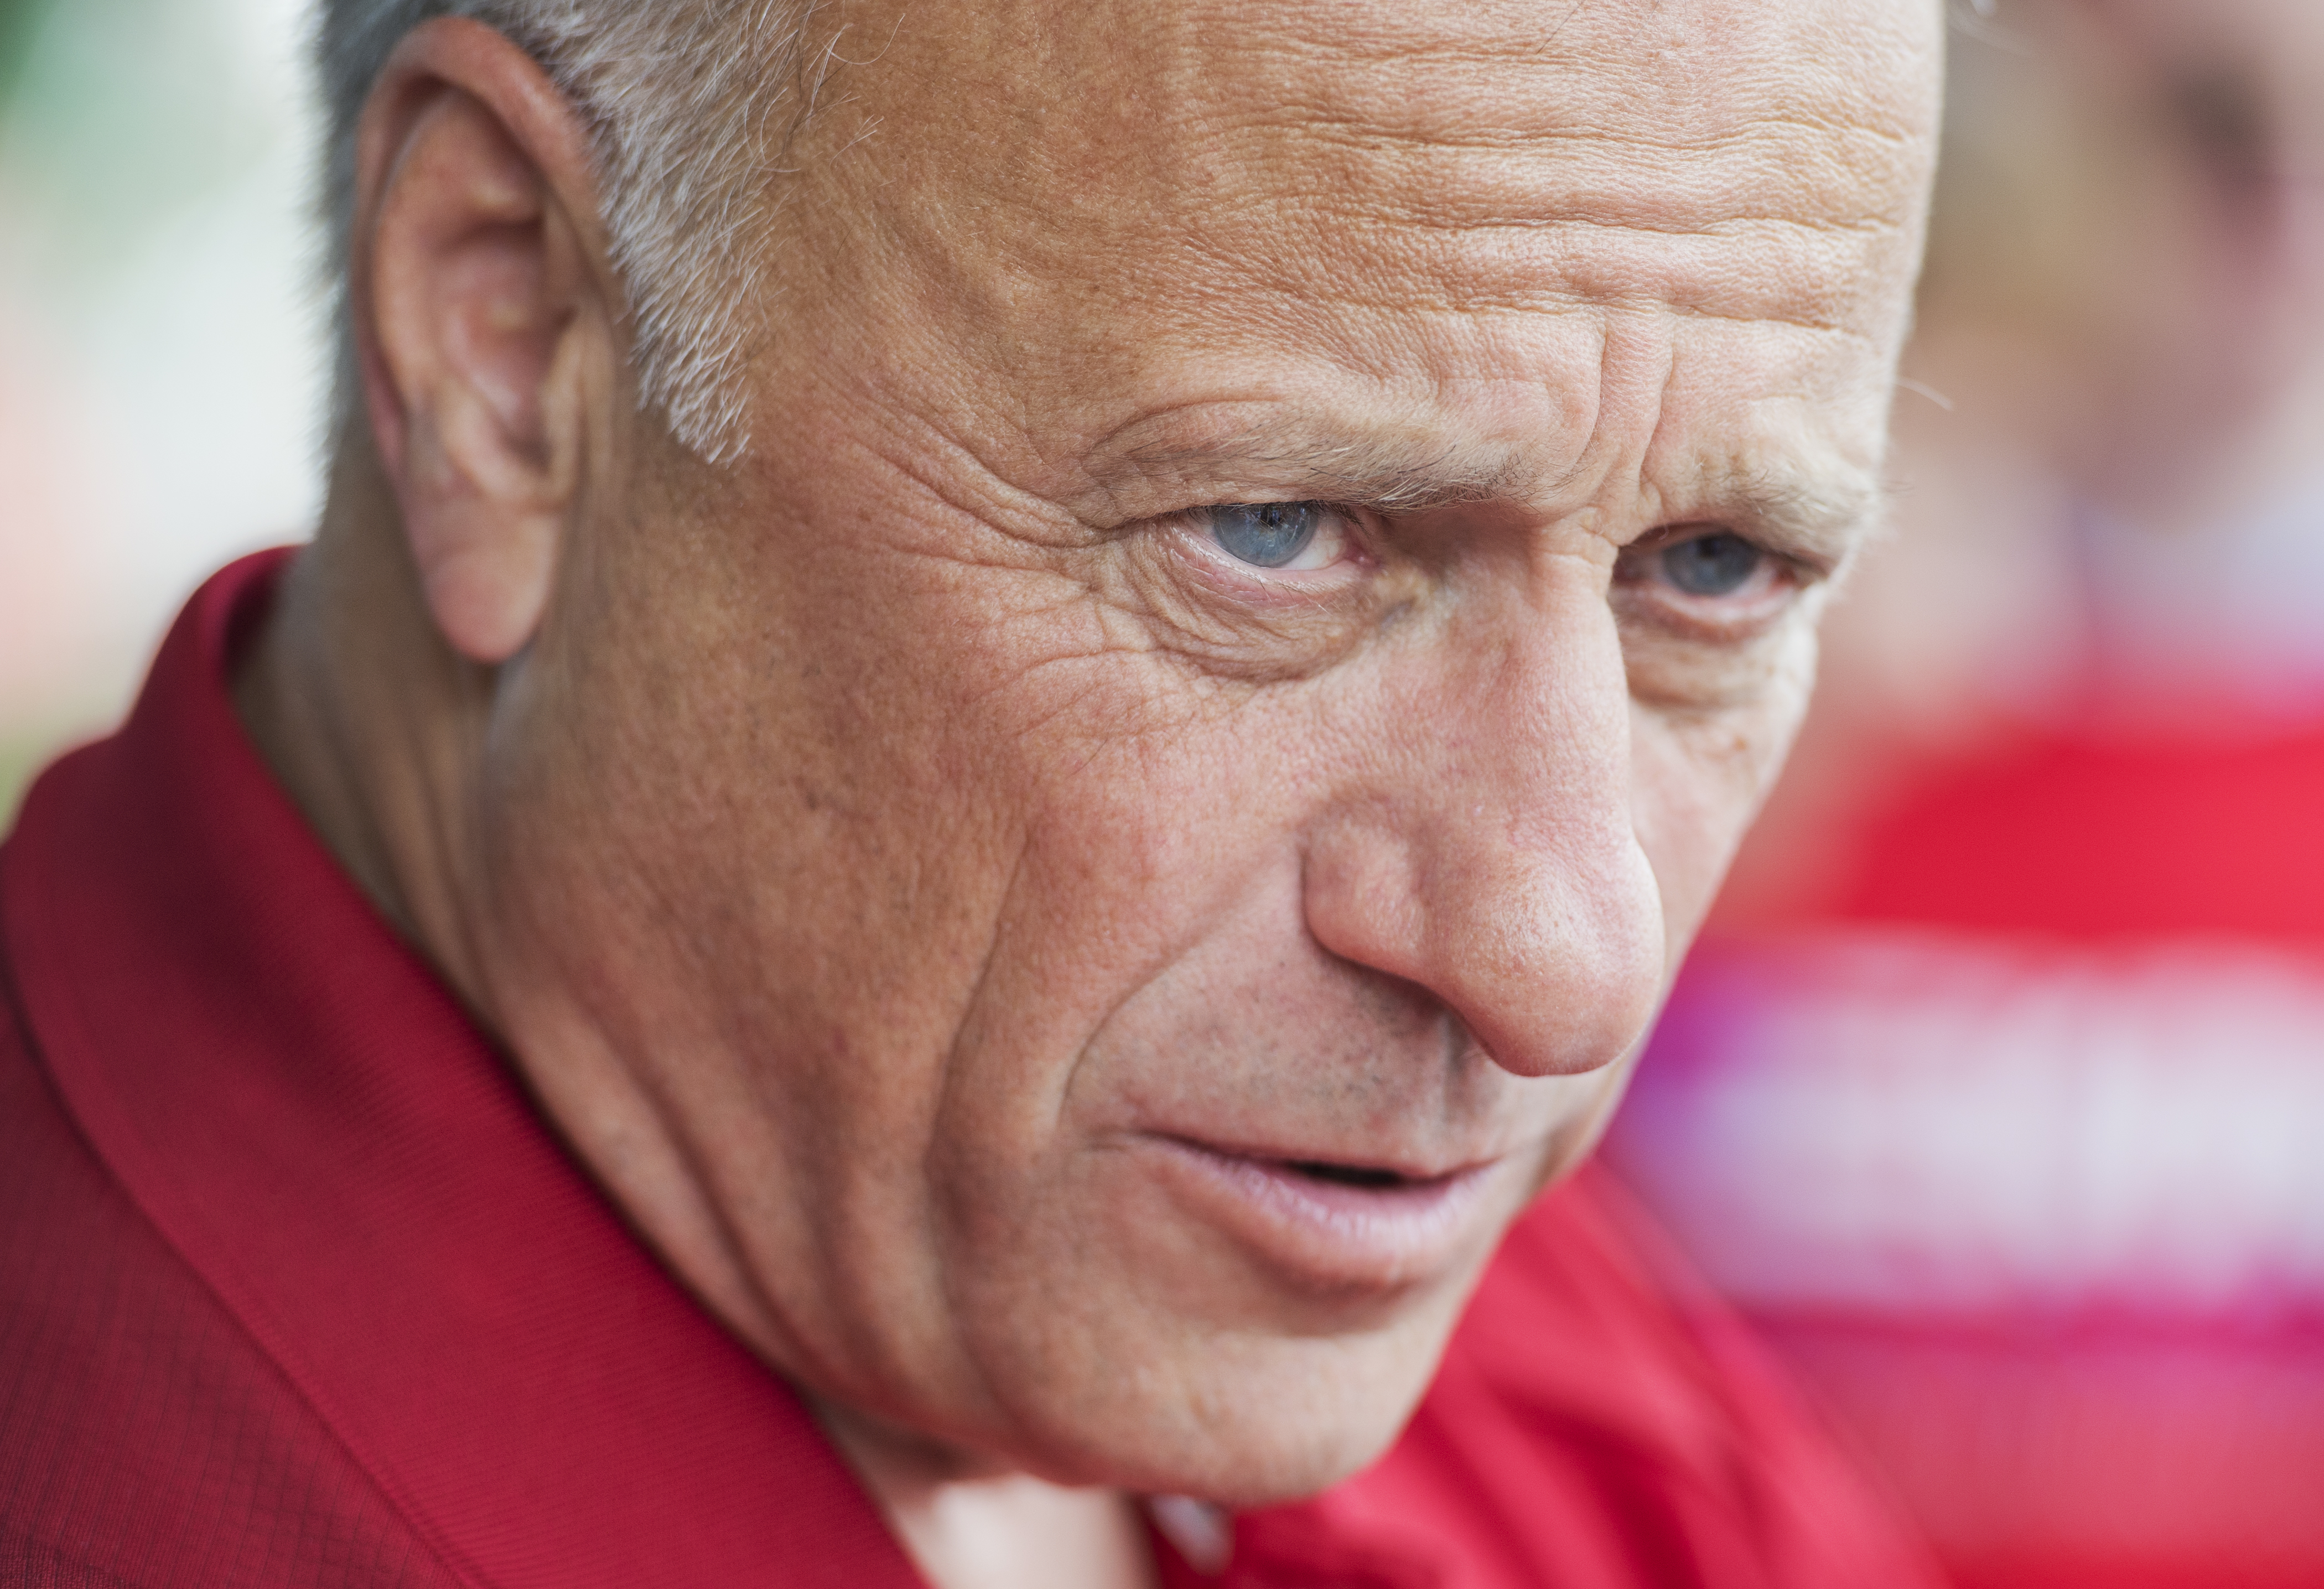 Rep. Steve King speaks with reporters at the 2014 Iowa State Fair in Des Moines, Iowa on Aug. 8, 2014.